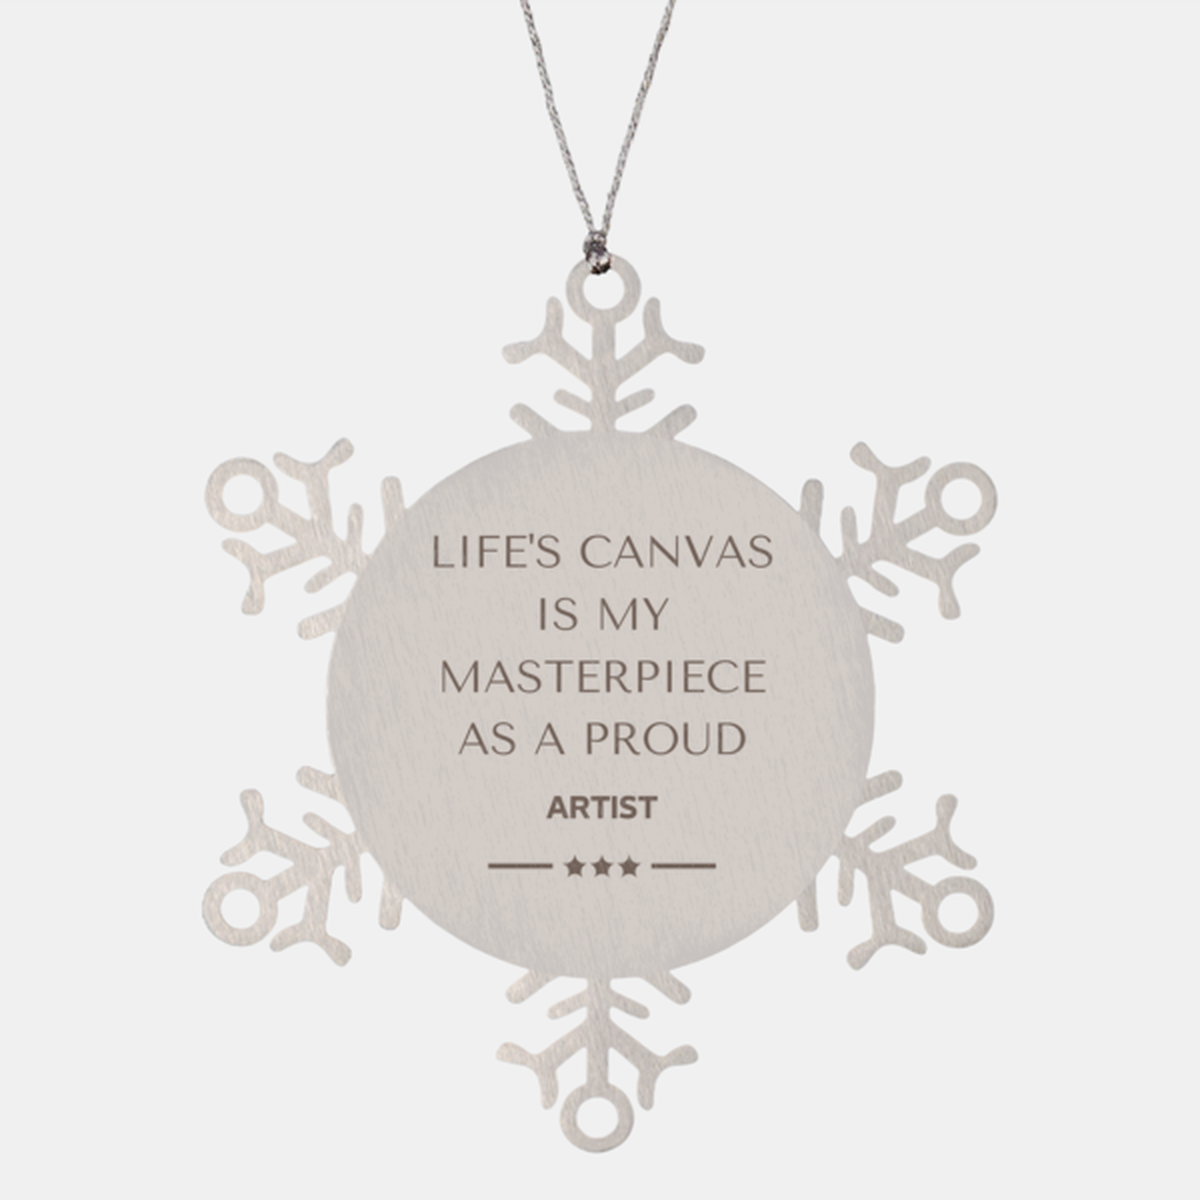 Proud Artist Gifts, Life's canvas is my masterpiece, Epic Birthday Christmas Unique Snowflake Ornament For Artist, Coworkers, Men, Women, Friends